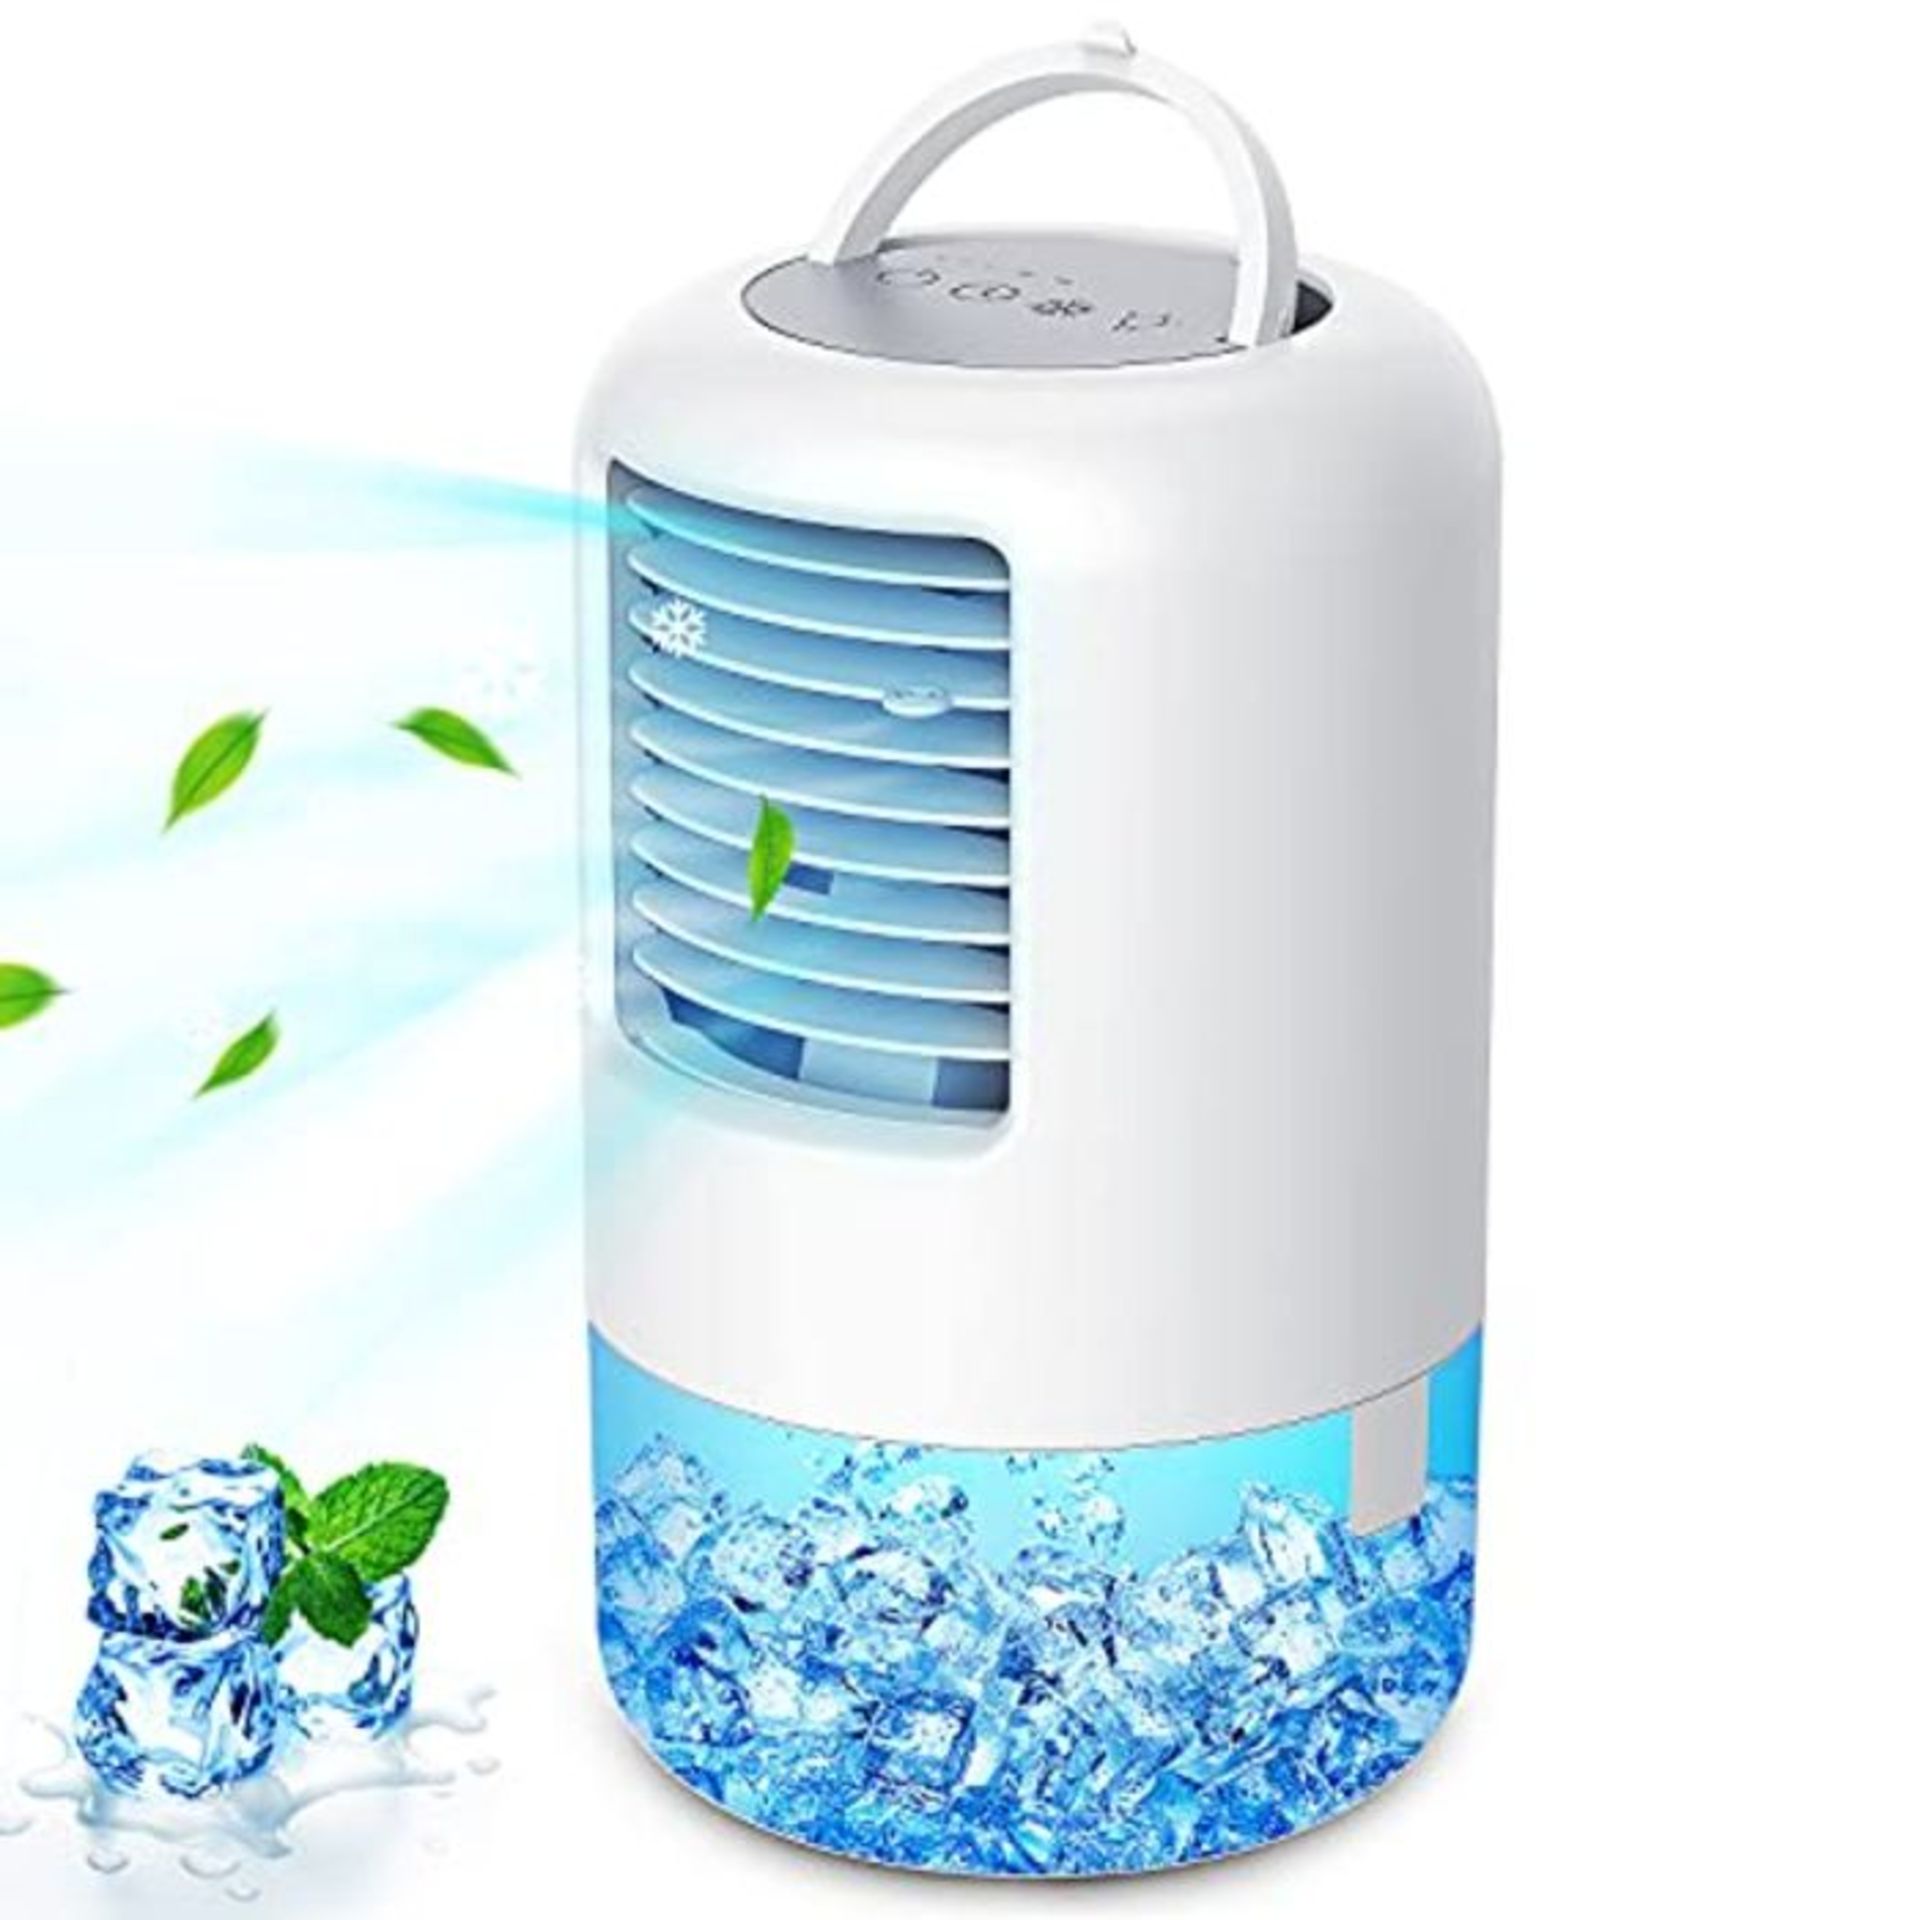 Hanmulee Portable Air Cooler, Mini Air Conditioners Humidifier Evaporative Cooler | 3